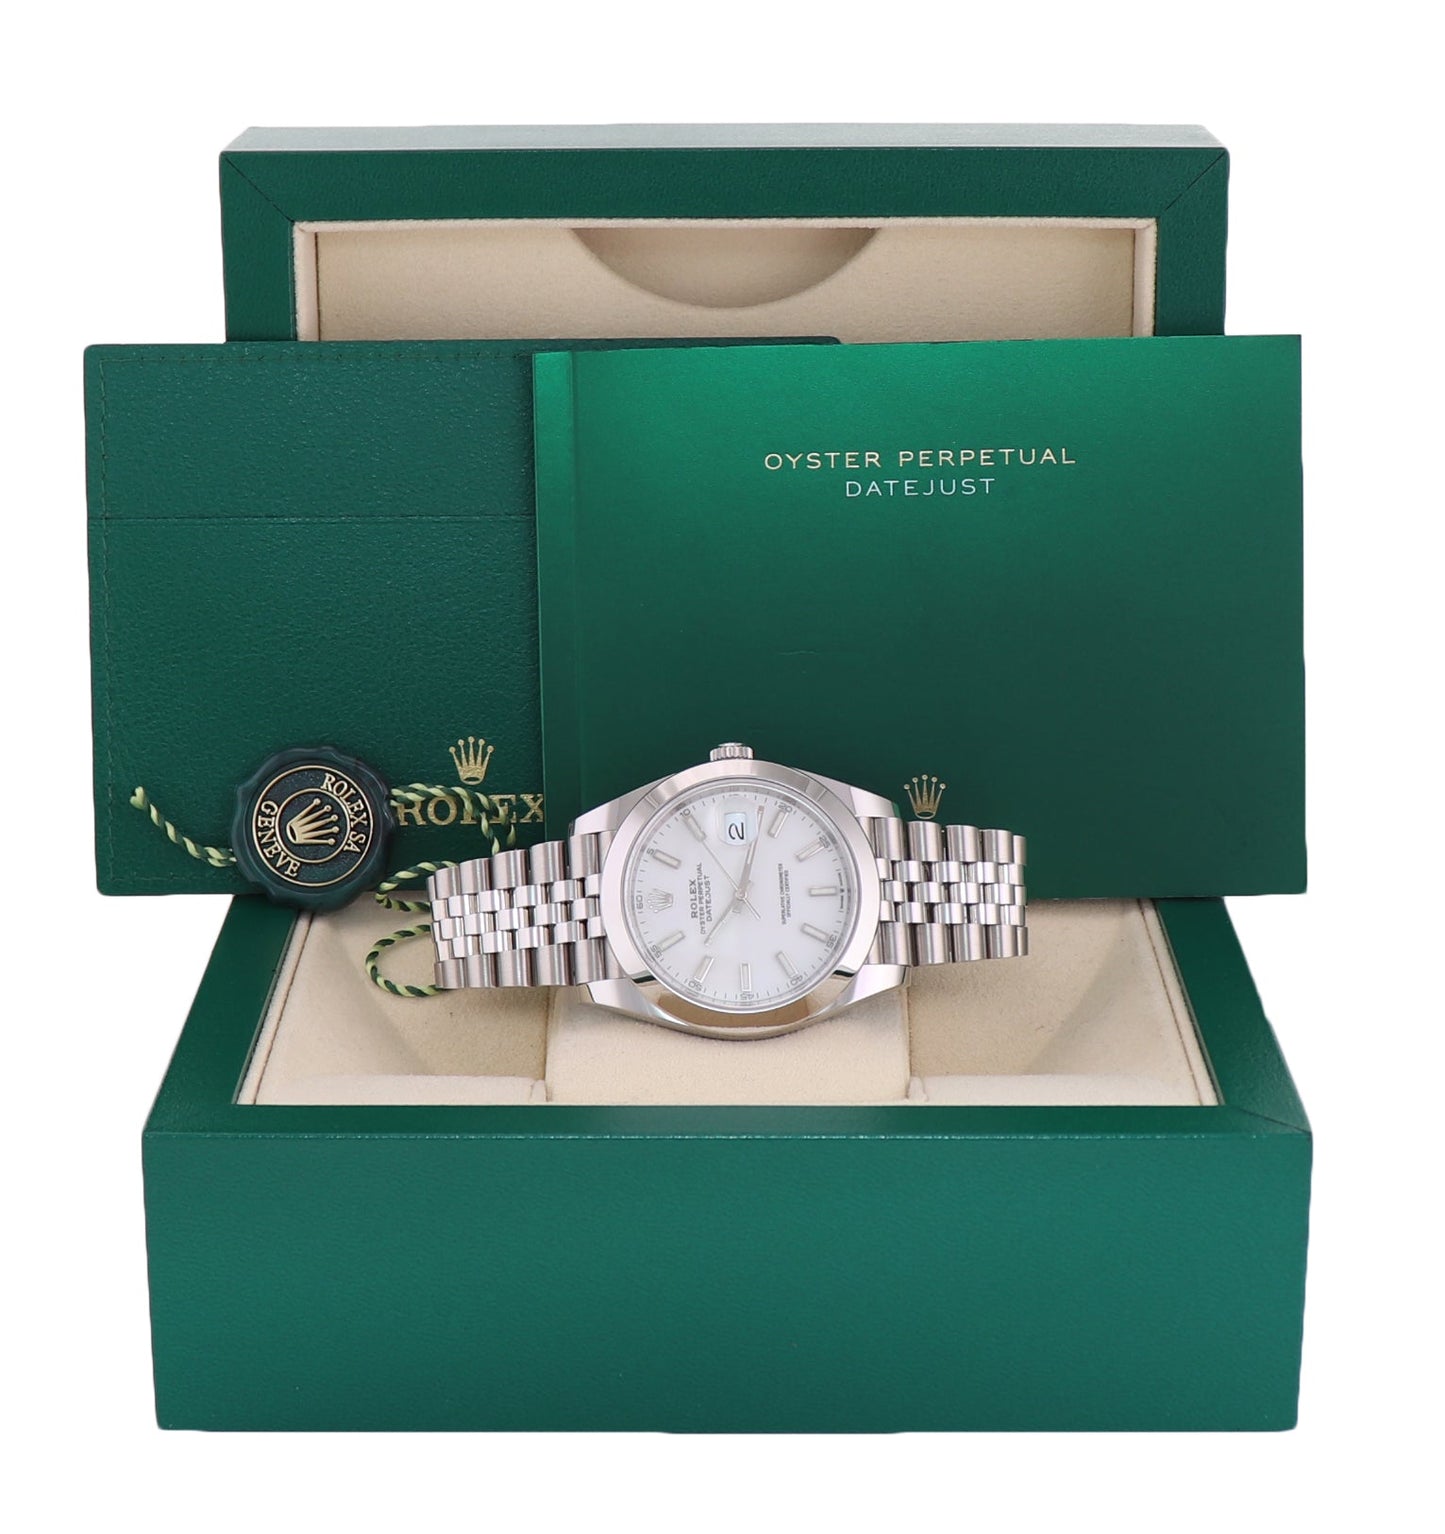 2022 NEW PAPERS Rolex DateJust 41 Steel 126300 White Jubilee 41mm Watch Box